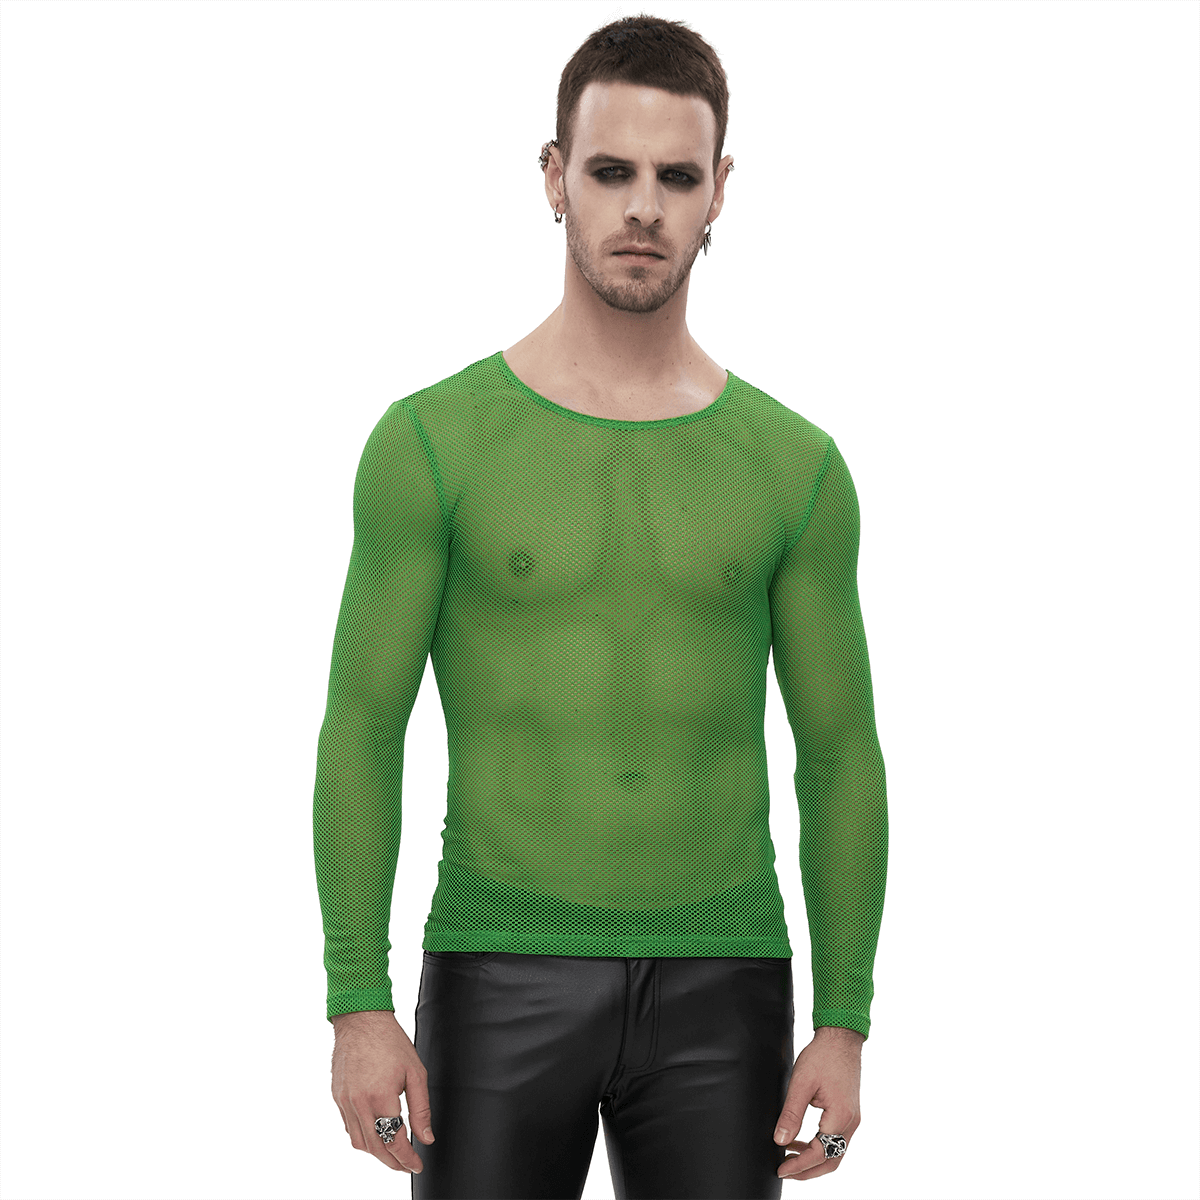 Men's Green Fluorescent Long Sleeve Mesh Top / Male Soft Stretchy Transparent Tops - HARD'N'HEAVY